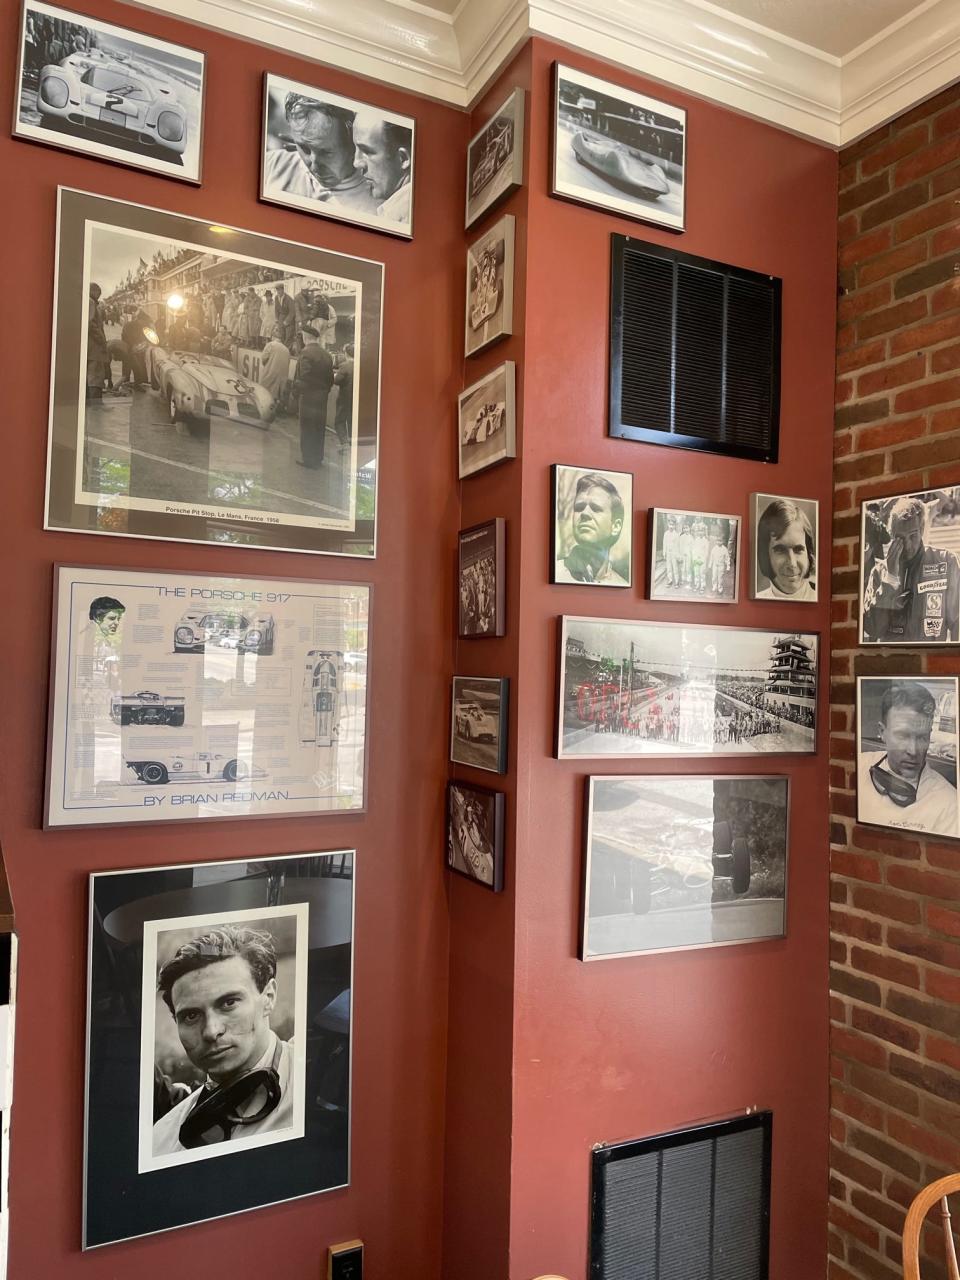 Racing memorabilia on the walls of the Franklin Square Deli in downtown Kent.